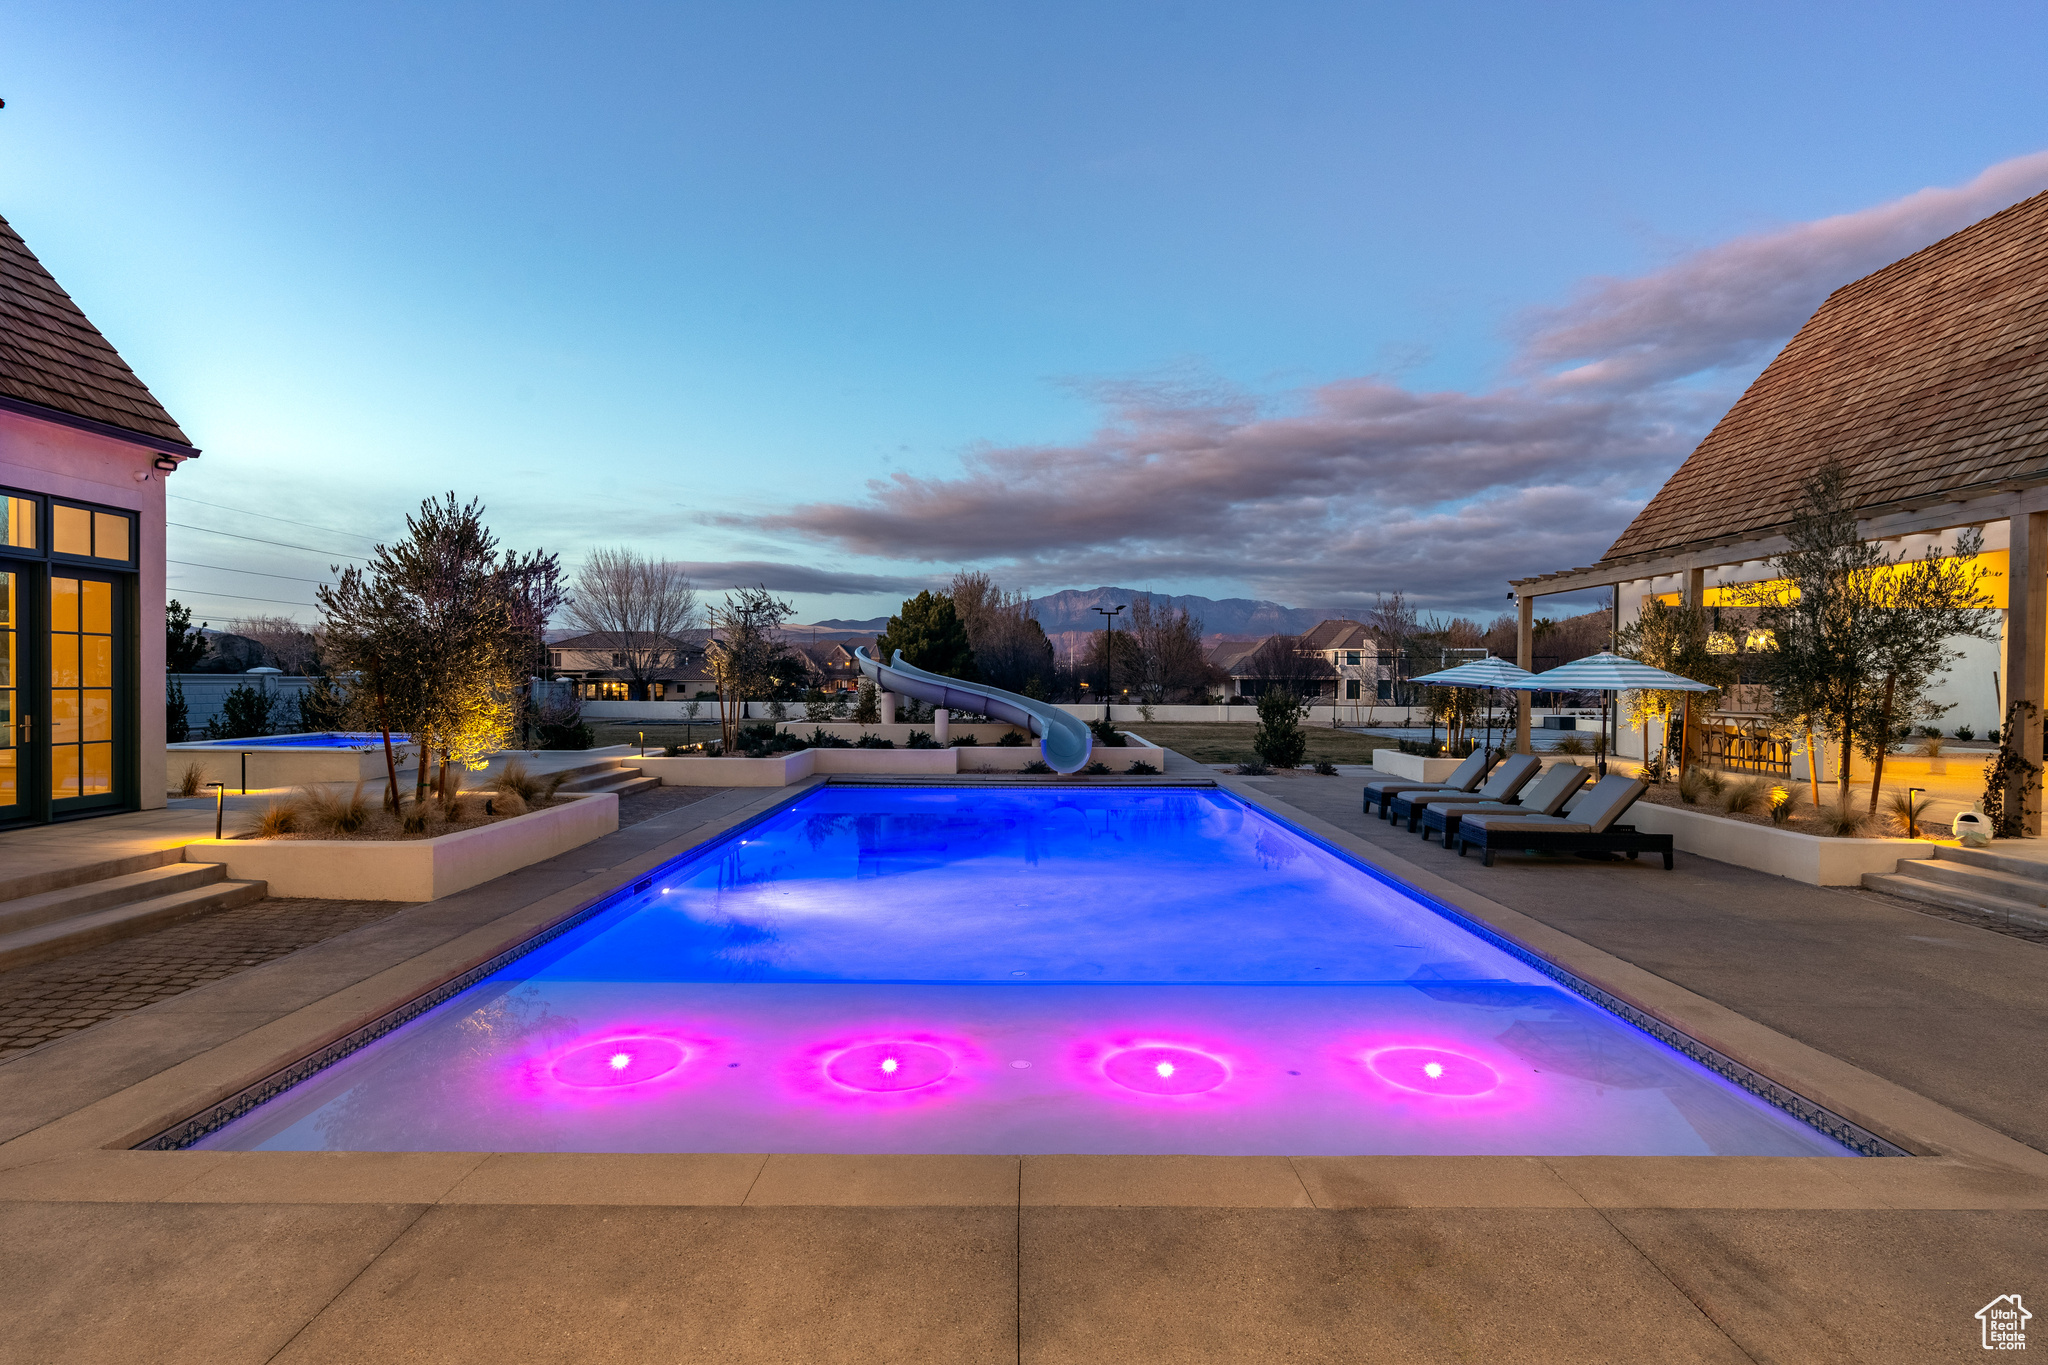 Pool at dusk featuring a water slide and a patio area